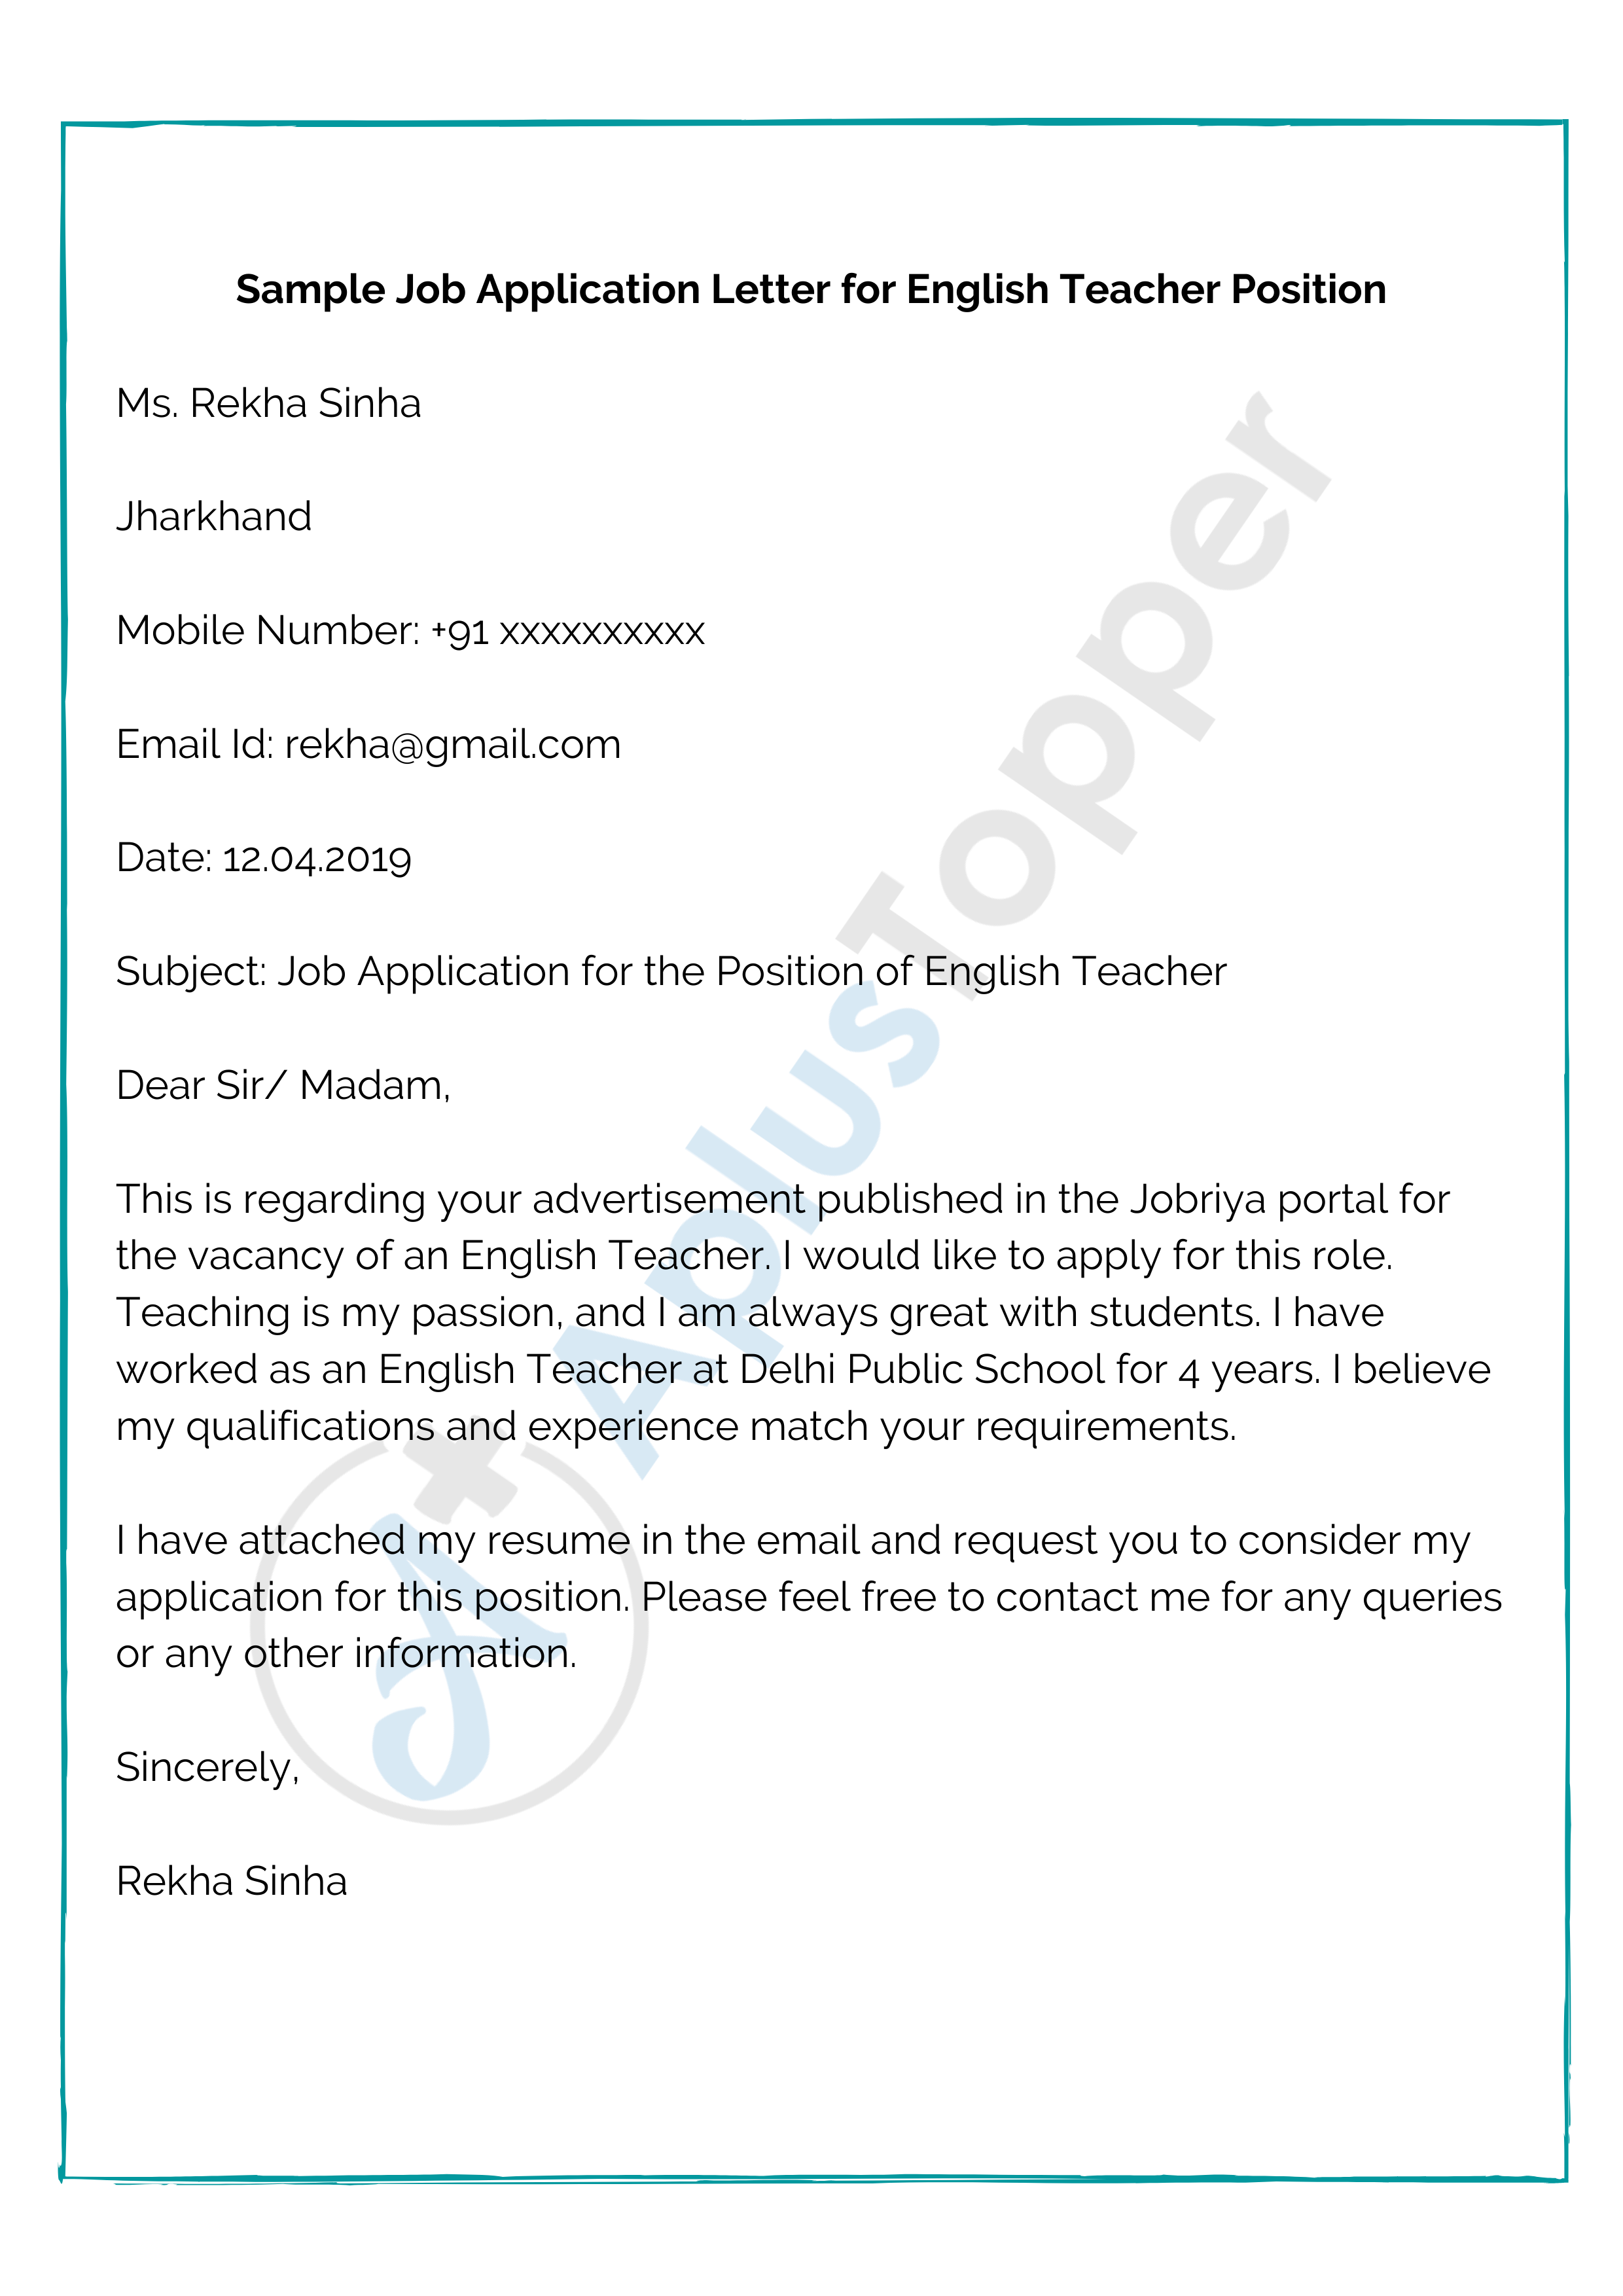 application letter for teaching job in government school